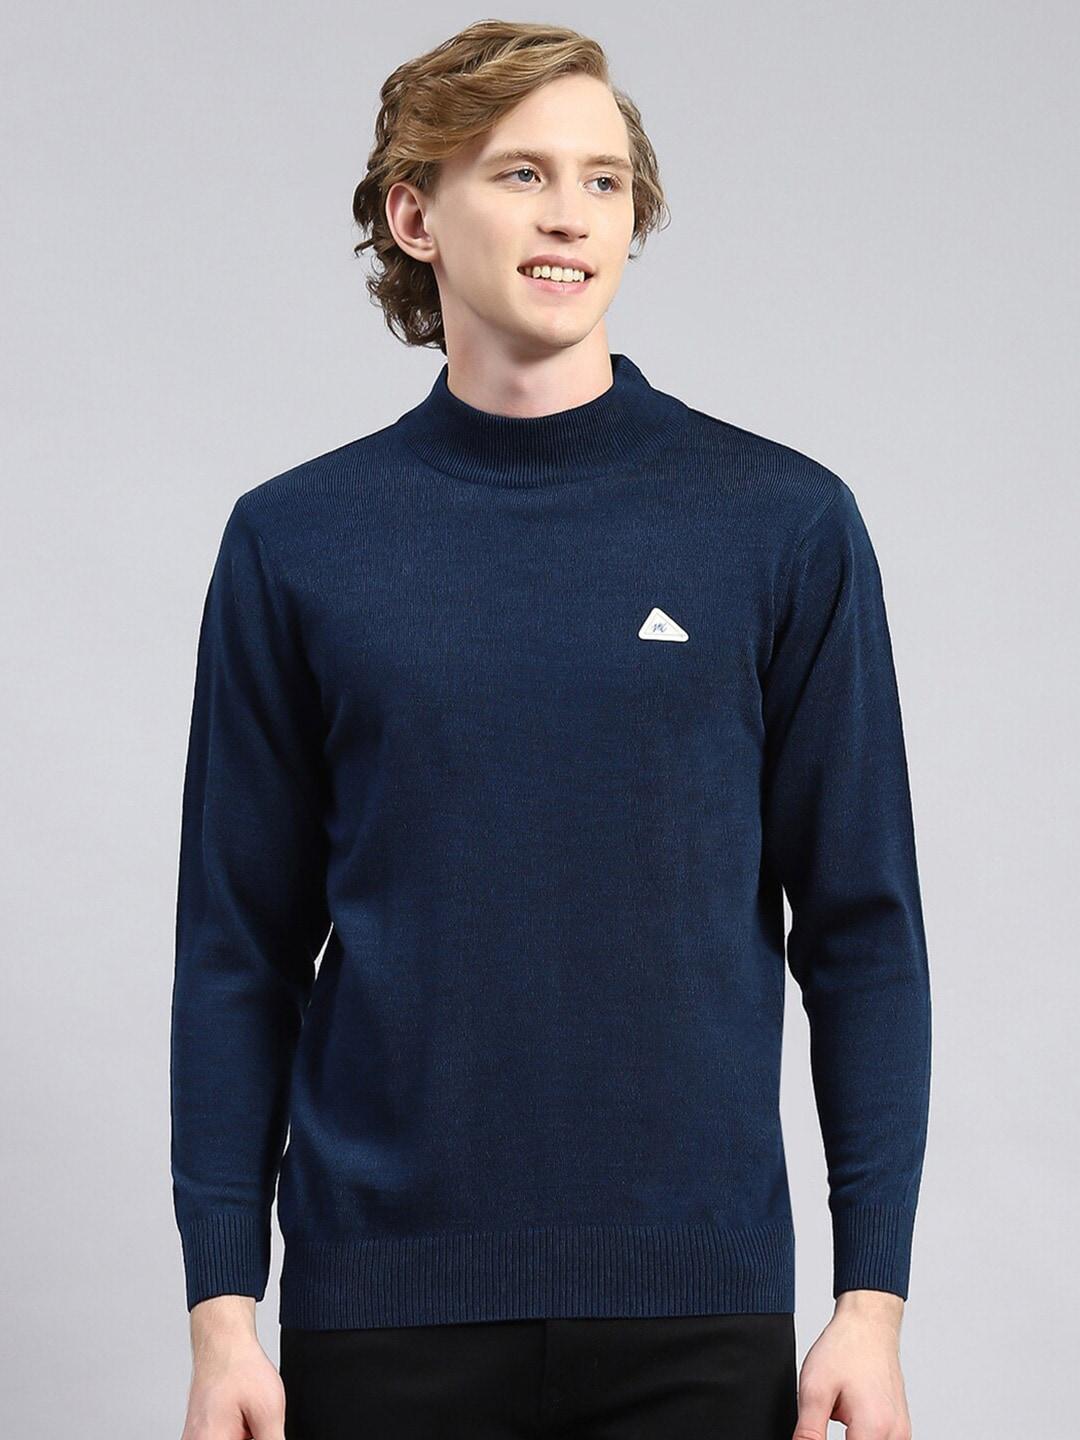 monte-carlo-high-neck-long-sleeves-pullover